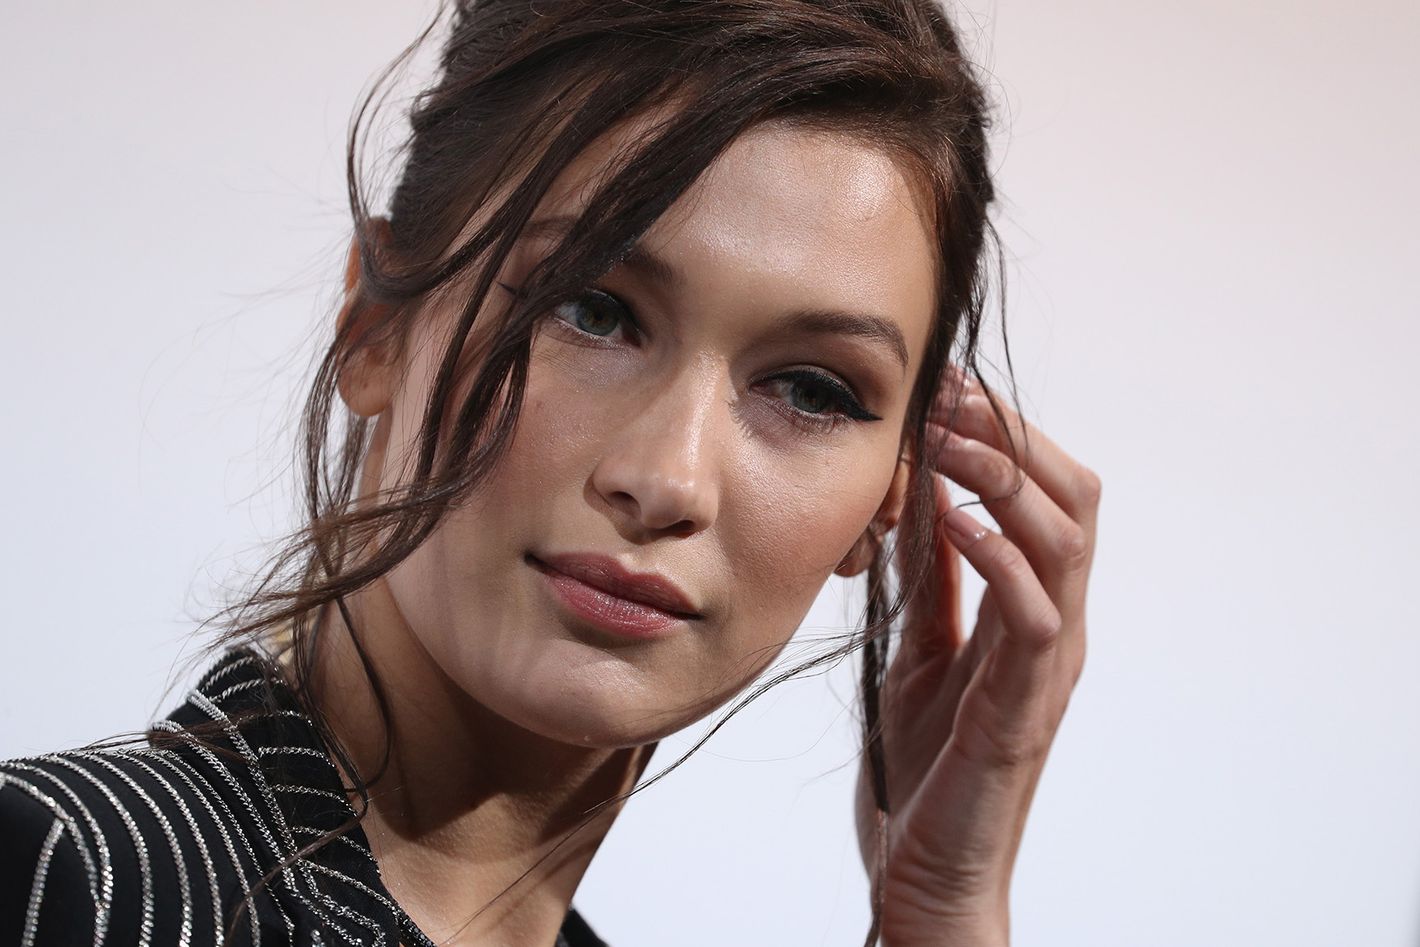 Bella Hadid Just Showed Us How To Do Side-Boob Style